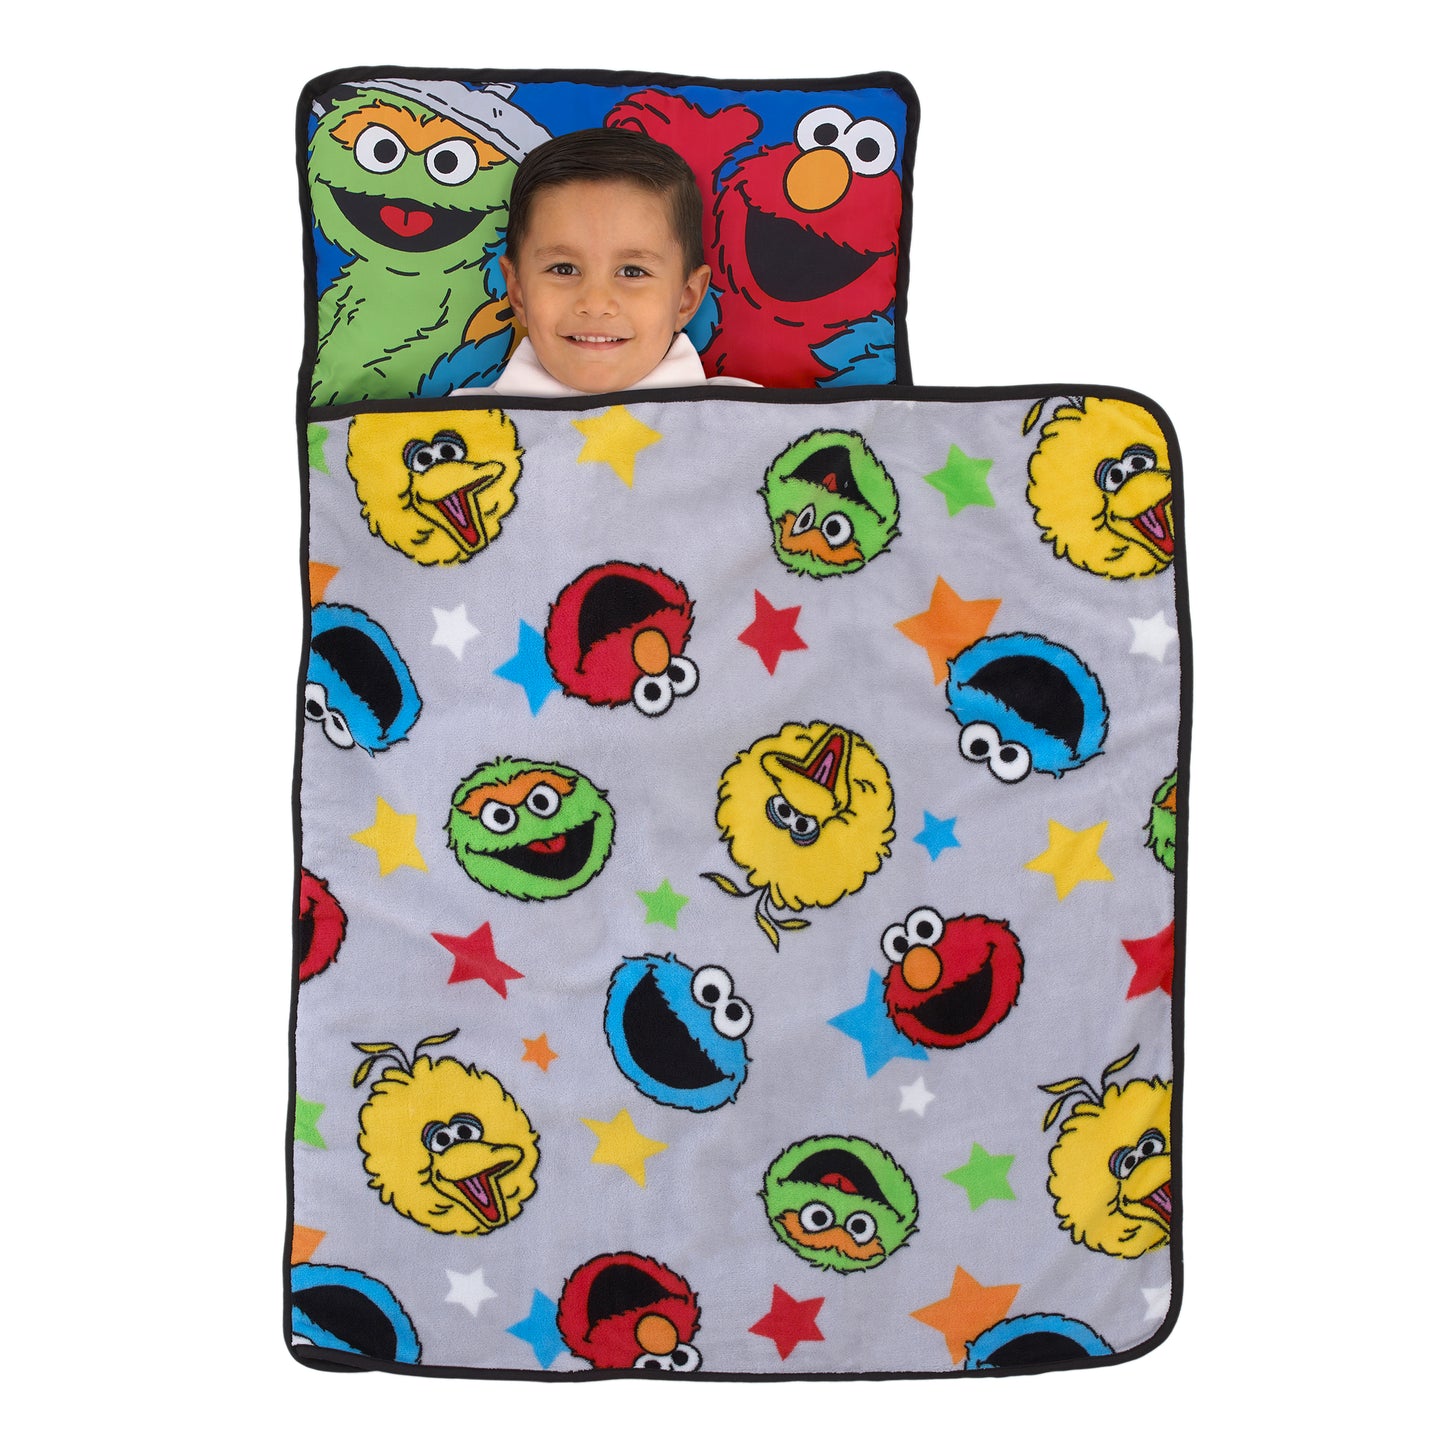 Sesame Street Adventures Blue, Yellow and Red Elmo, Big Bird, Oscar the Grouch and Cookie Monster Toddler Nap Mat